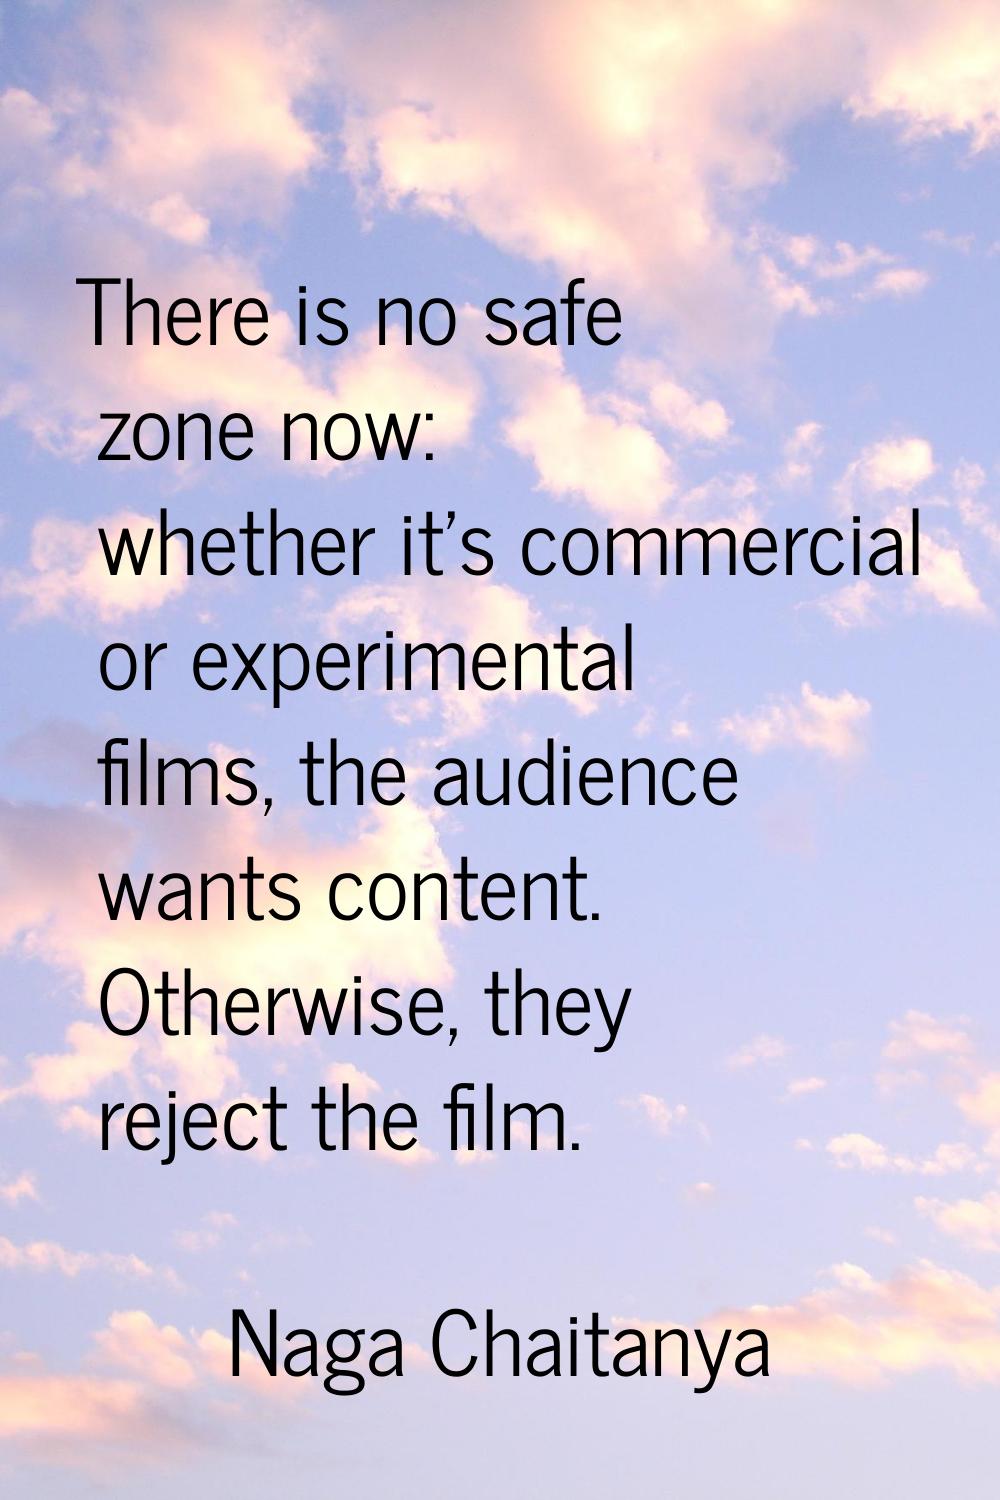 There is no safe zone now: whether it's commercial or experimental films, the audience wants conten